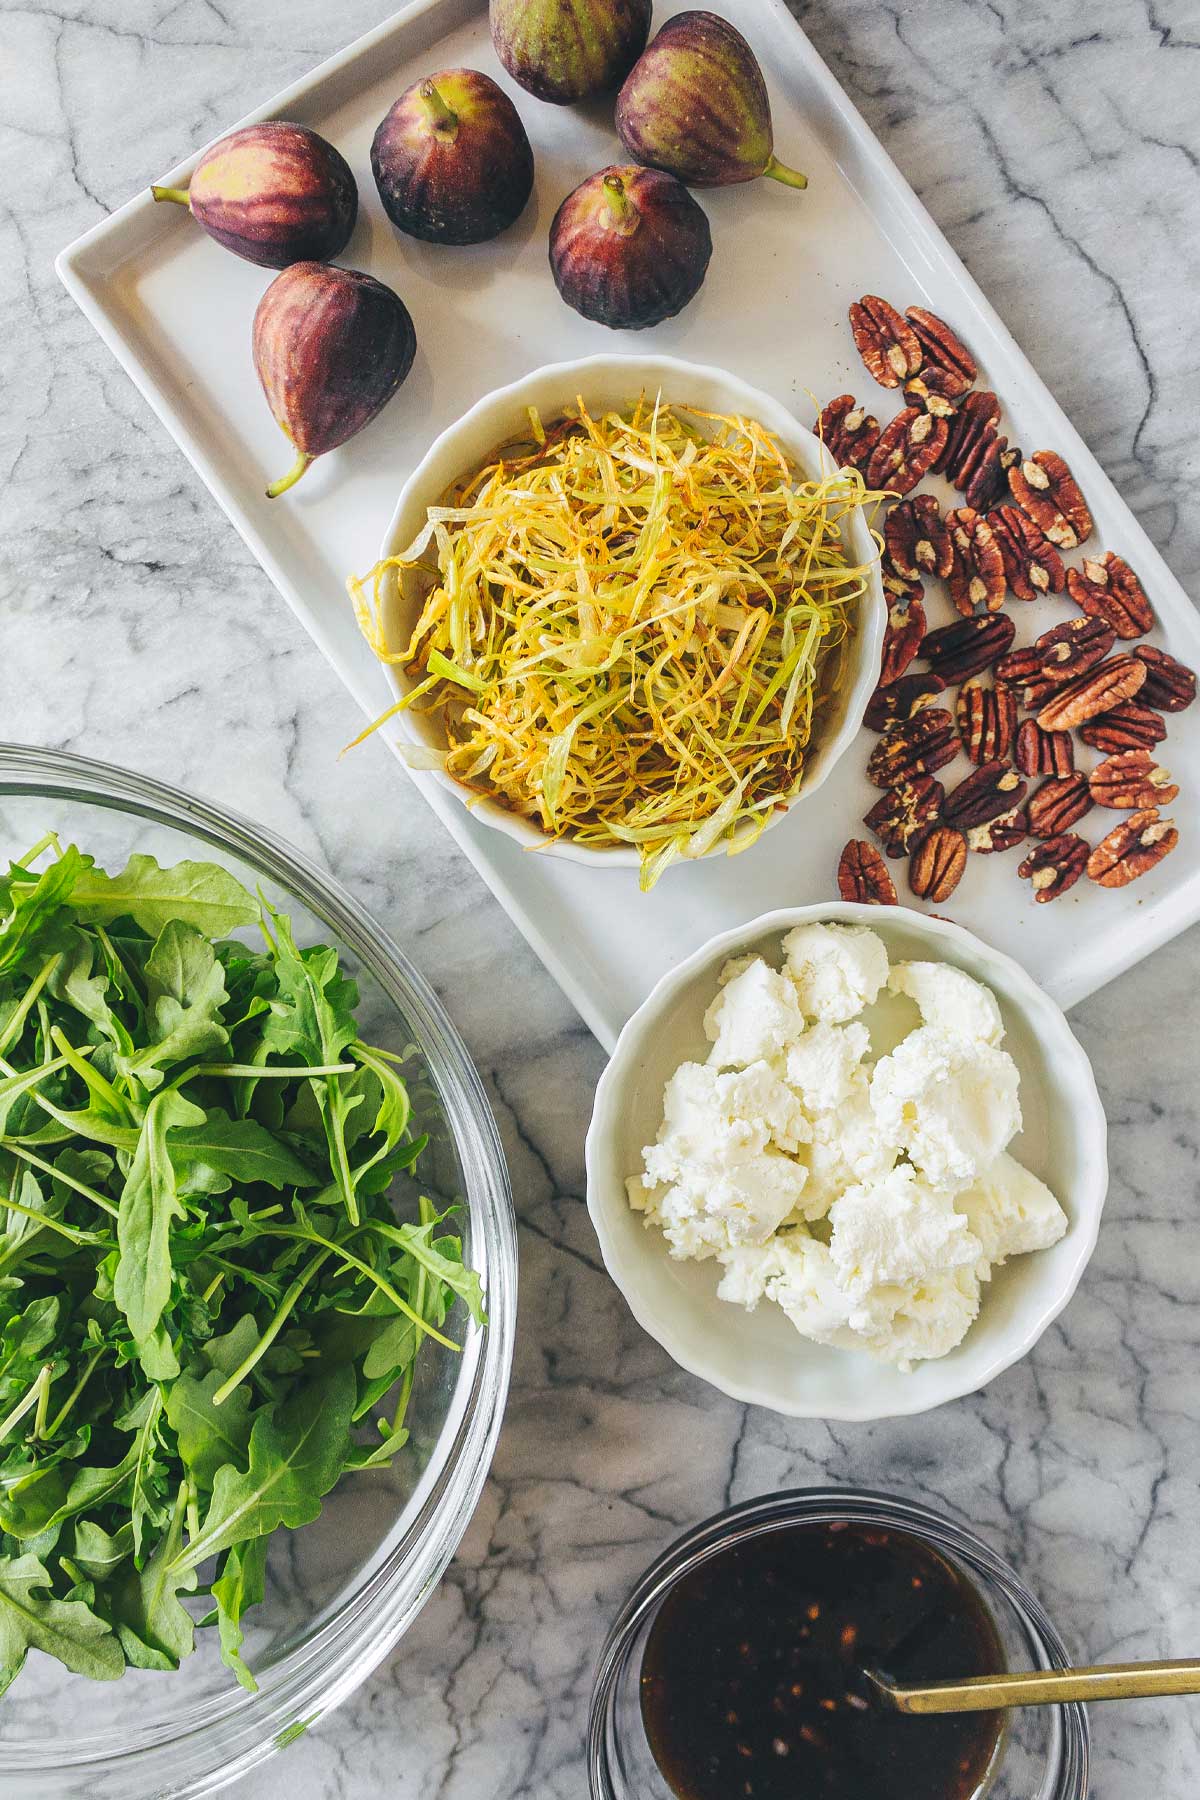 A marble board layered with the ingredients for Fig & Goat Cheese Salad: a bowl of fresh arugula, fresh figs, goat cheese crumbles, toasted pecans, and a bowl of frizzled leeks.